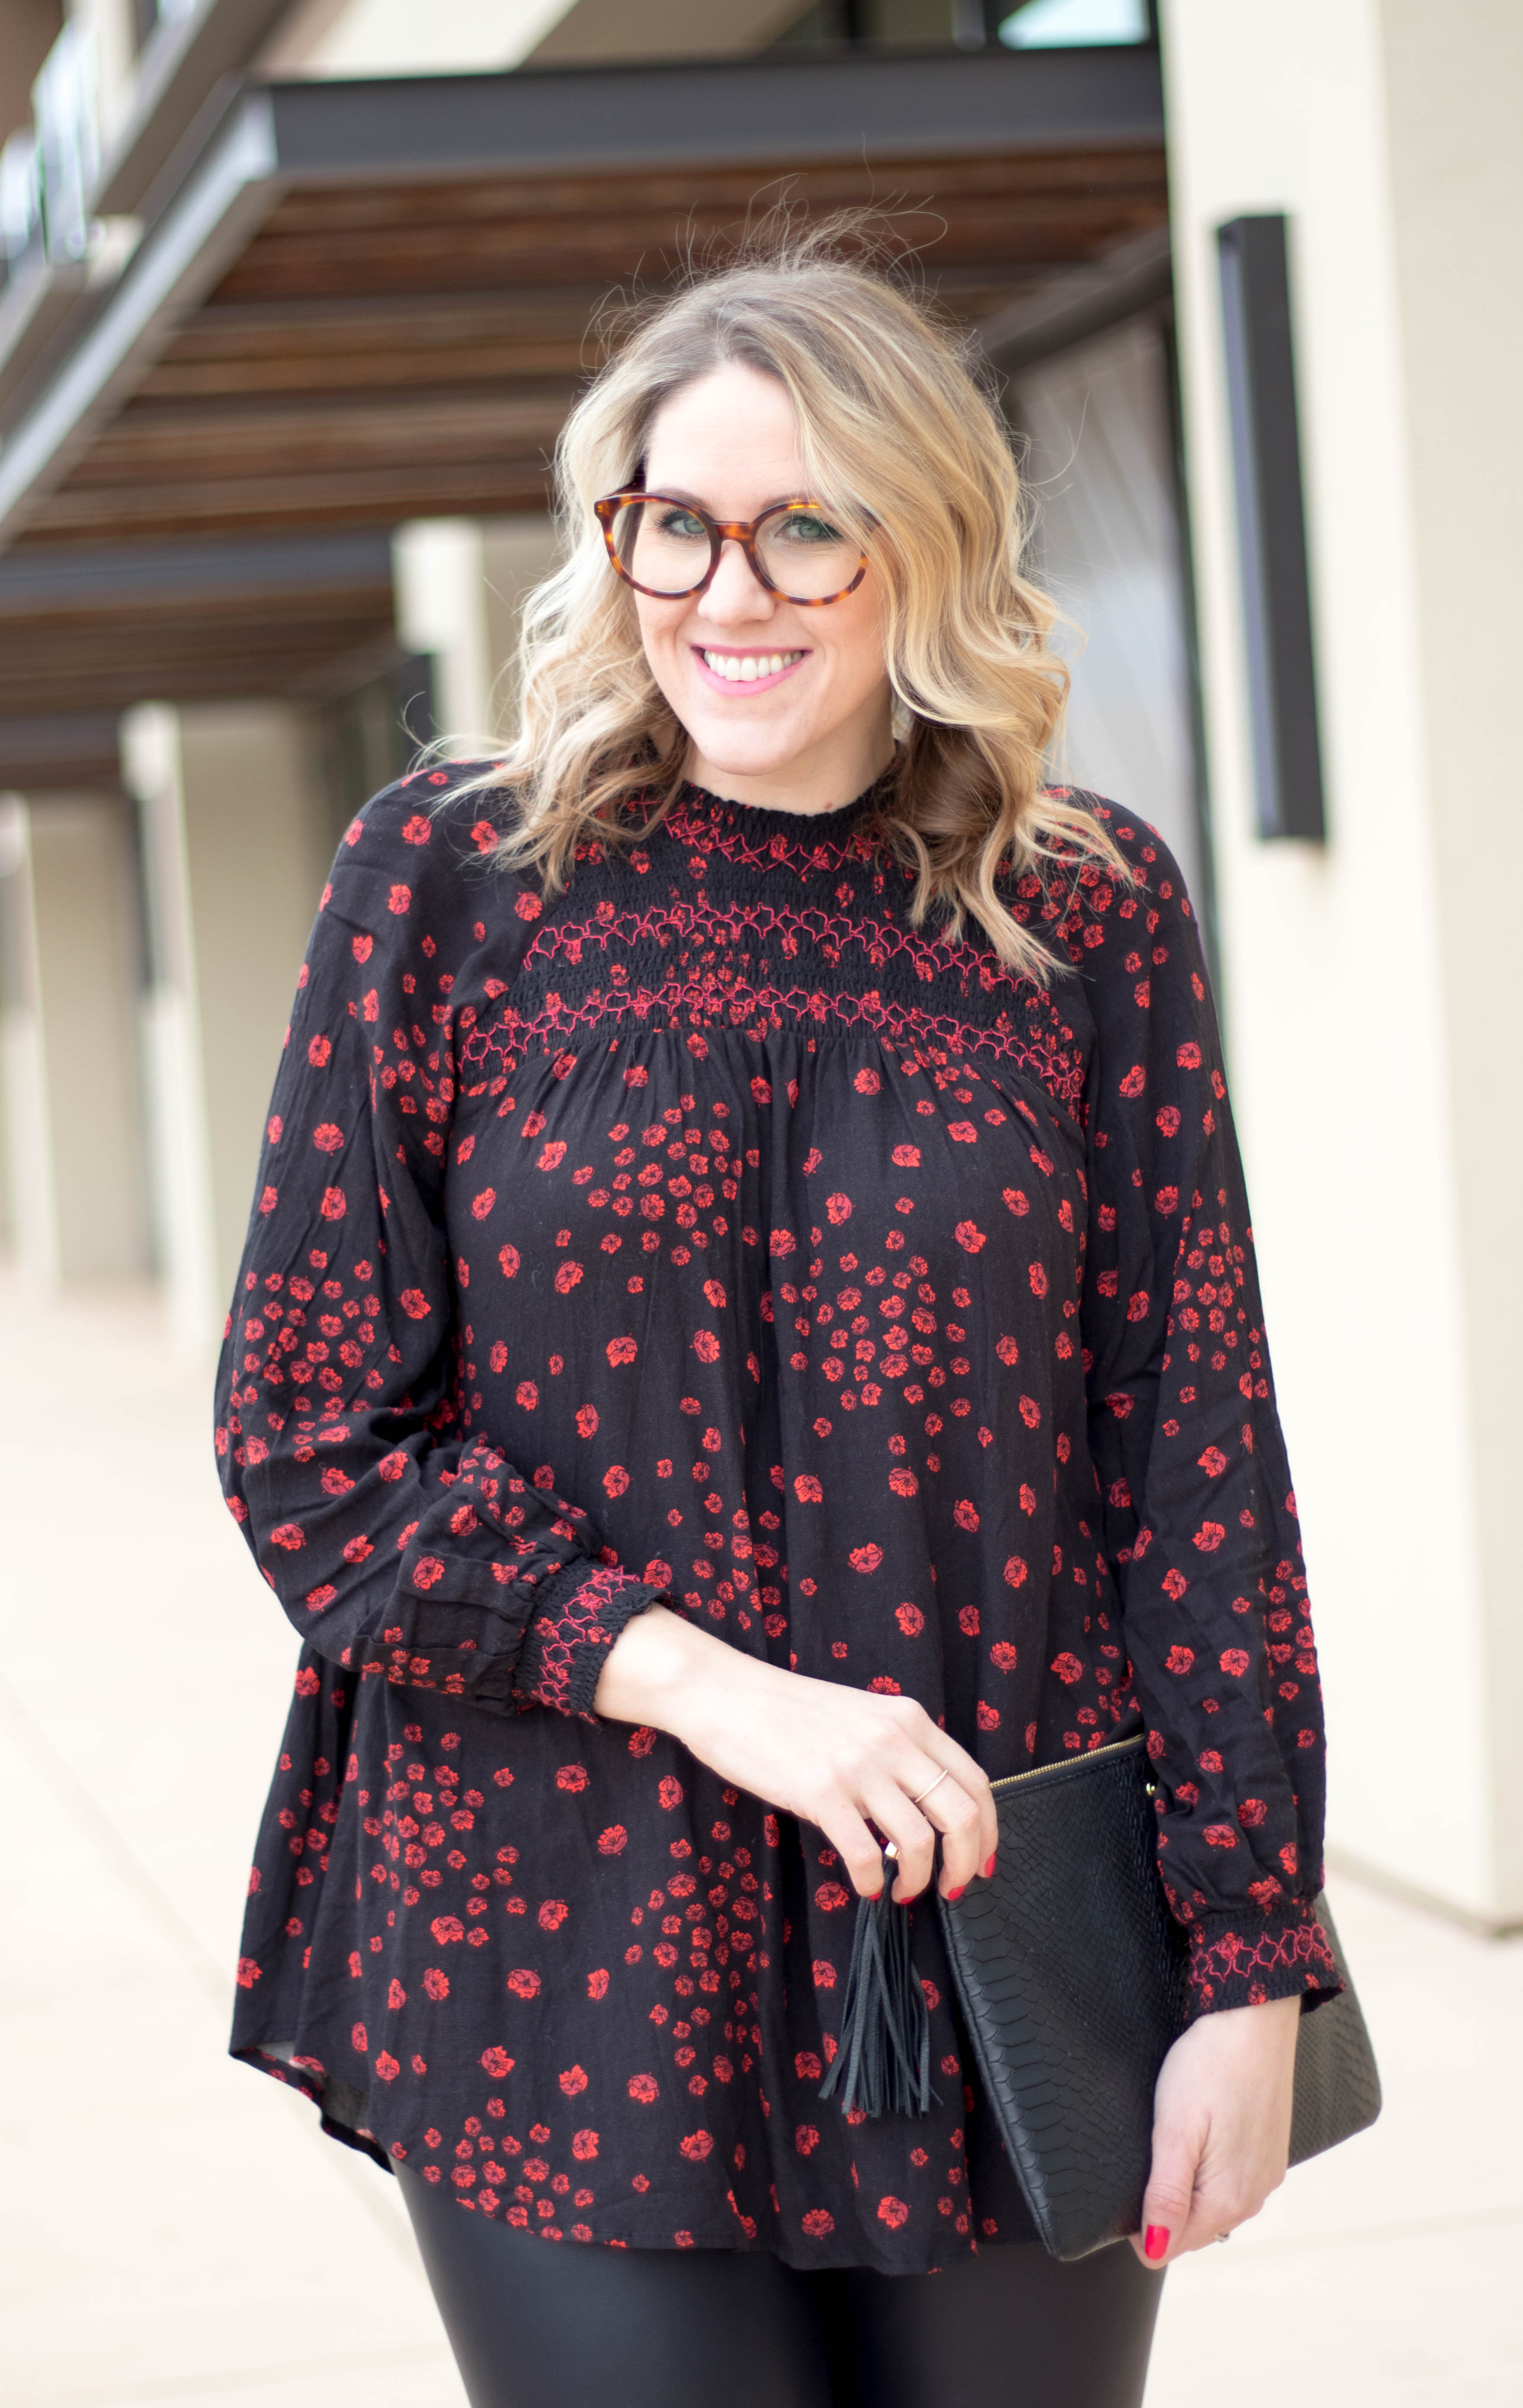 free people tunic outfit #freepeople #winterfashion #roundglasses